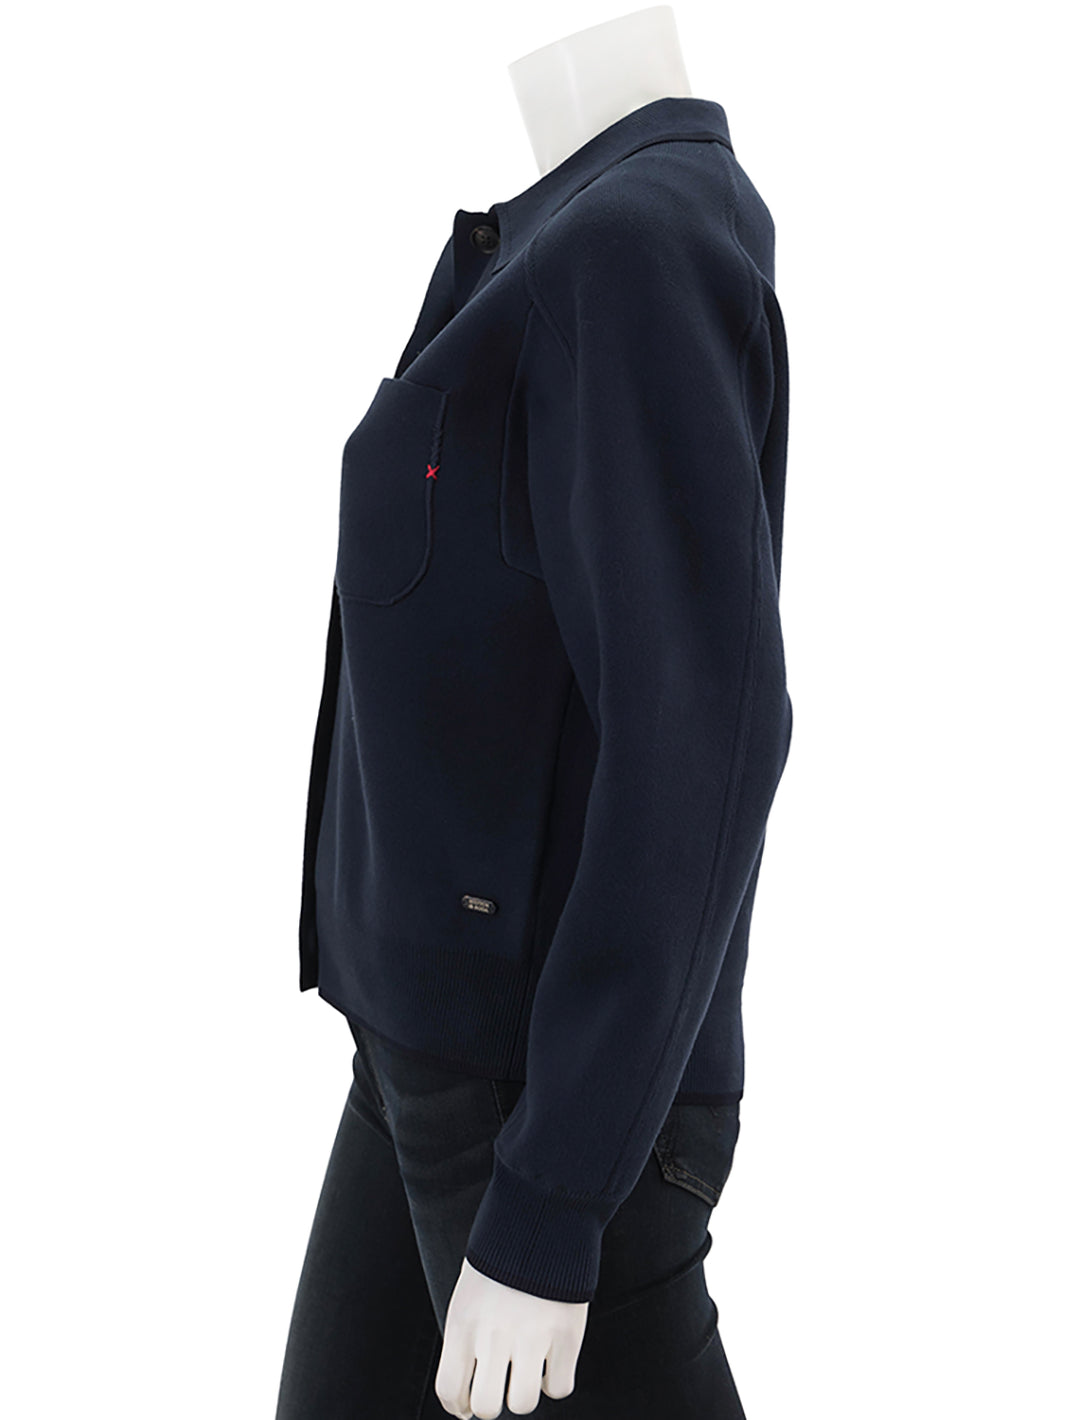 Side view of Scotch & Soda's compact knit jacket in night.